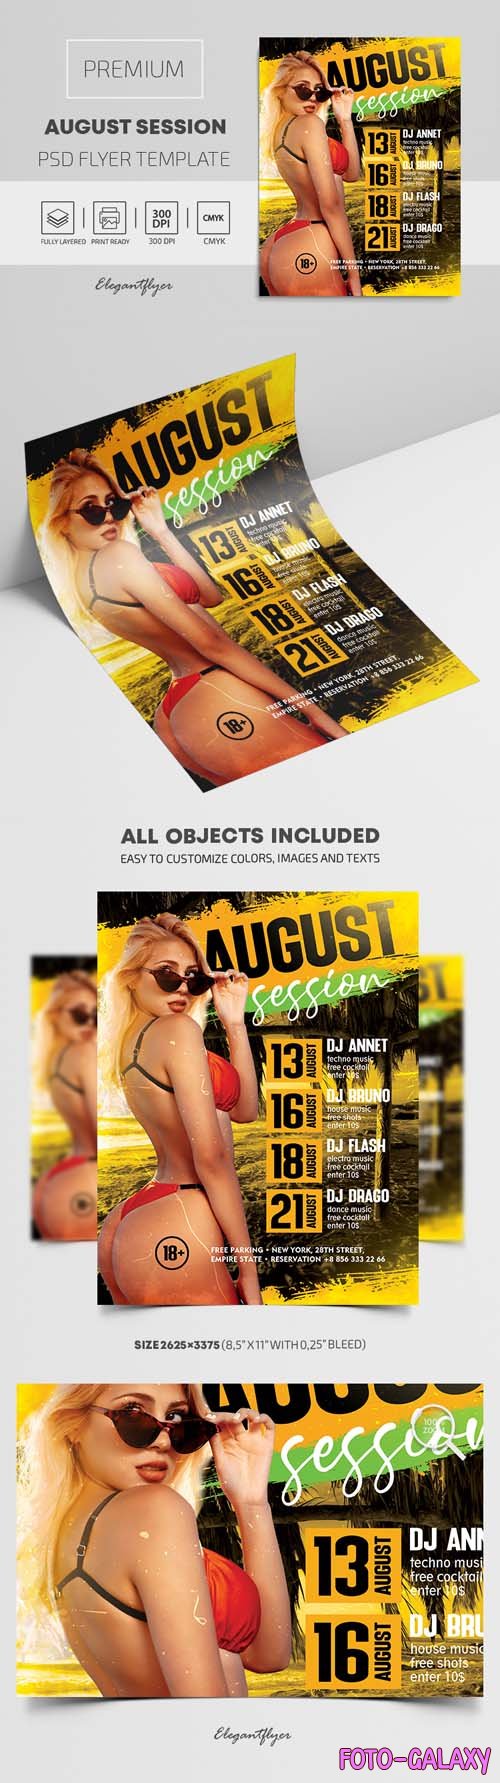 August Session  Premium PSD Flyer Template